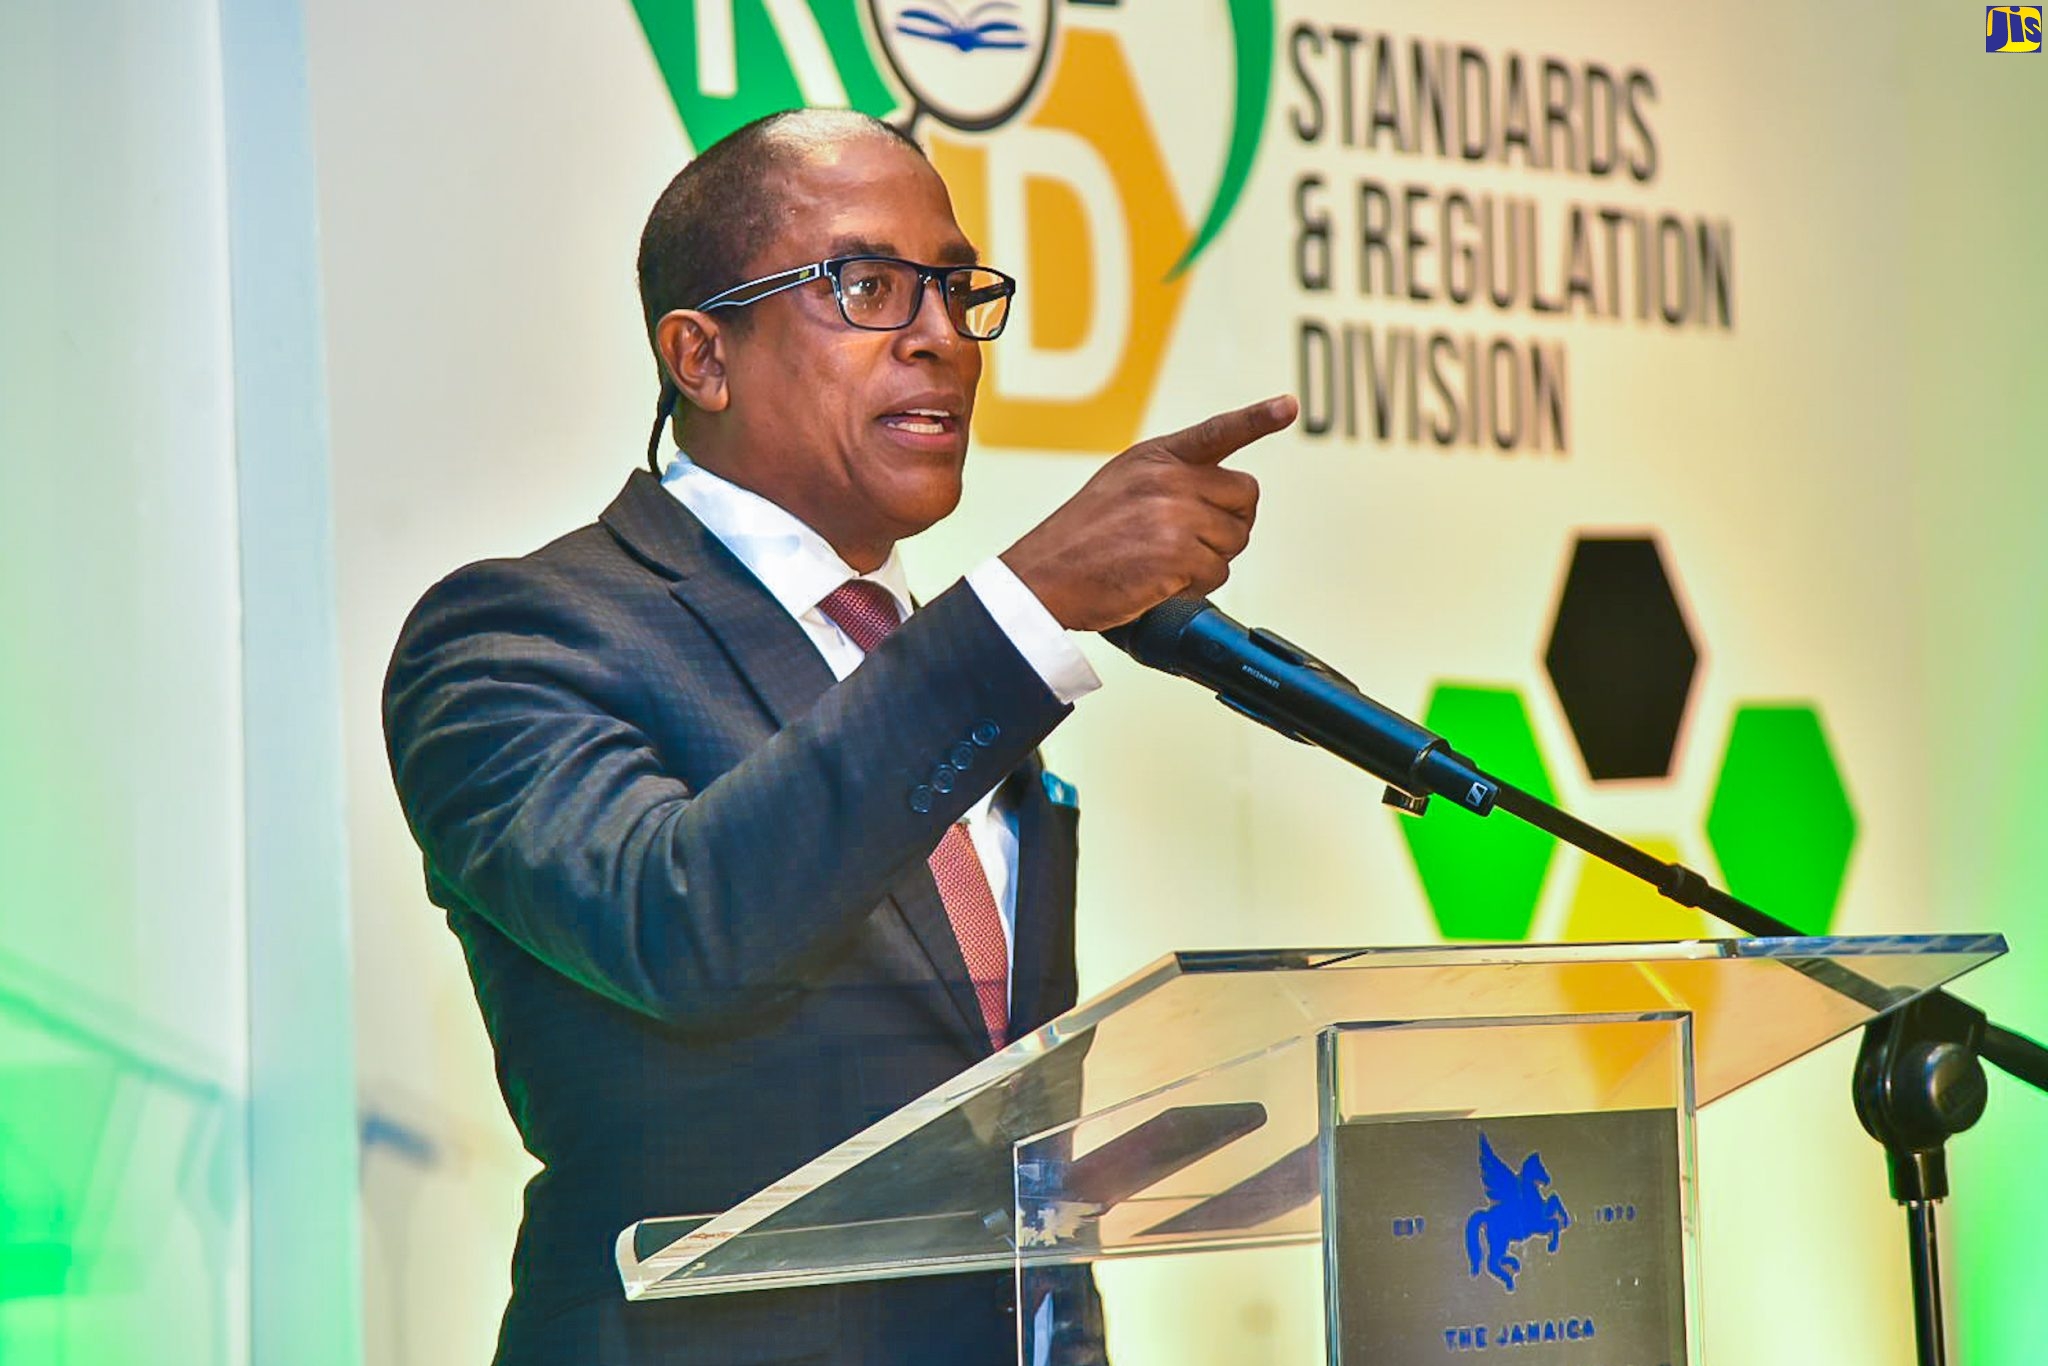 PHOTOS: Ministry of Health’s Standards and Regulations Division ISO Certified